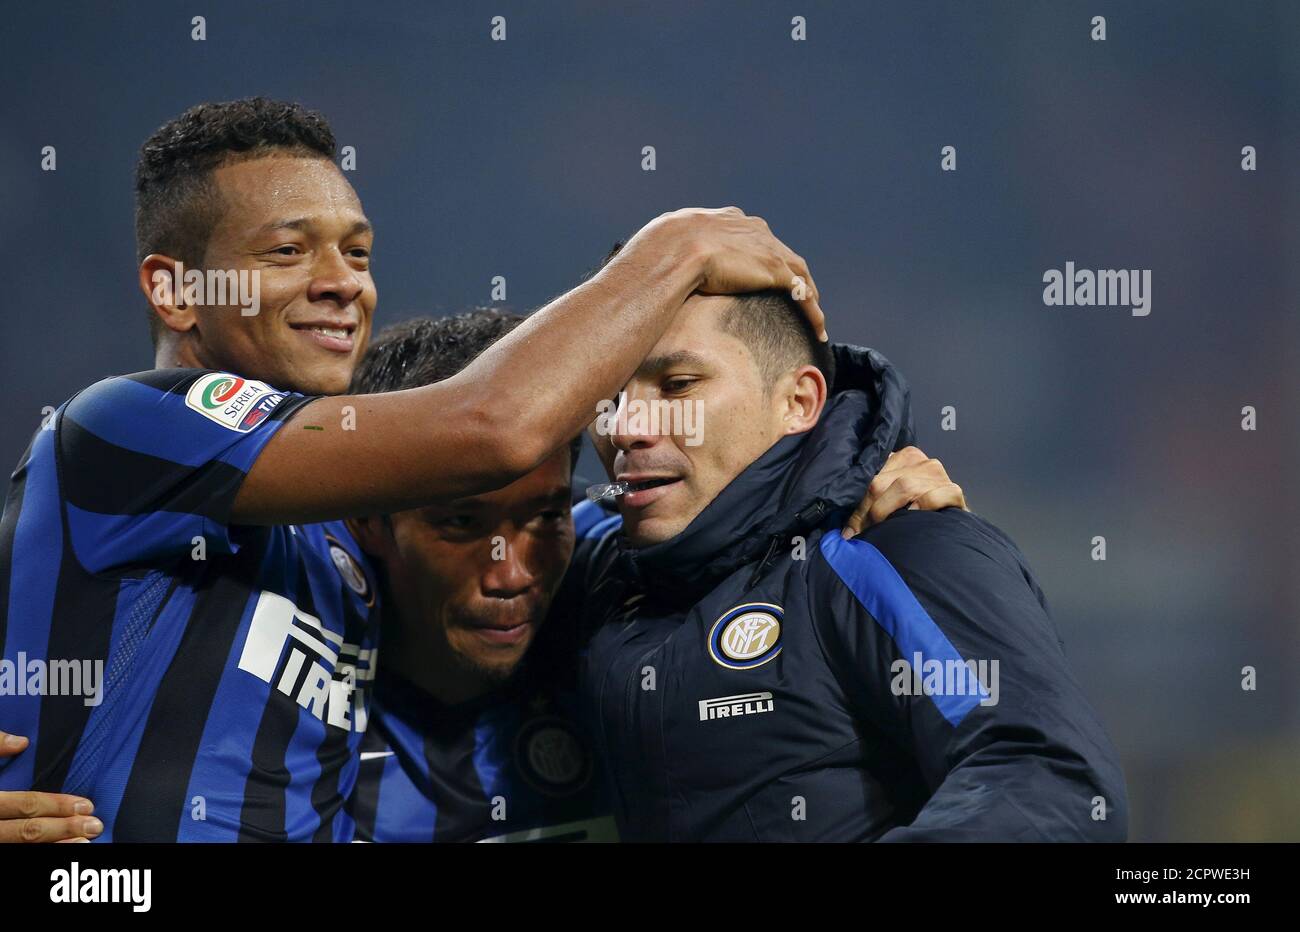 inter-milans-gary-medel-r-fredy-guarin-l-and-yuto-nagatomo-celebrate-at-the-end-of-their-italian-serie-a-soccer-match-against-as-roma-at-the-san-siro-stadium-in-milan-italy-october-31-2015-reutersalessandro-garofalo-2CPWE3H.jpg